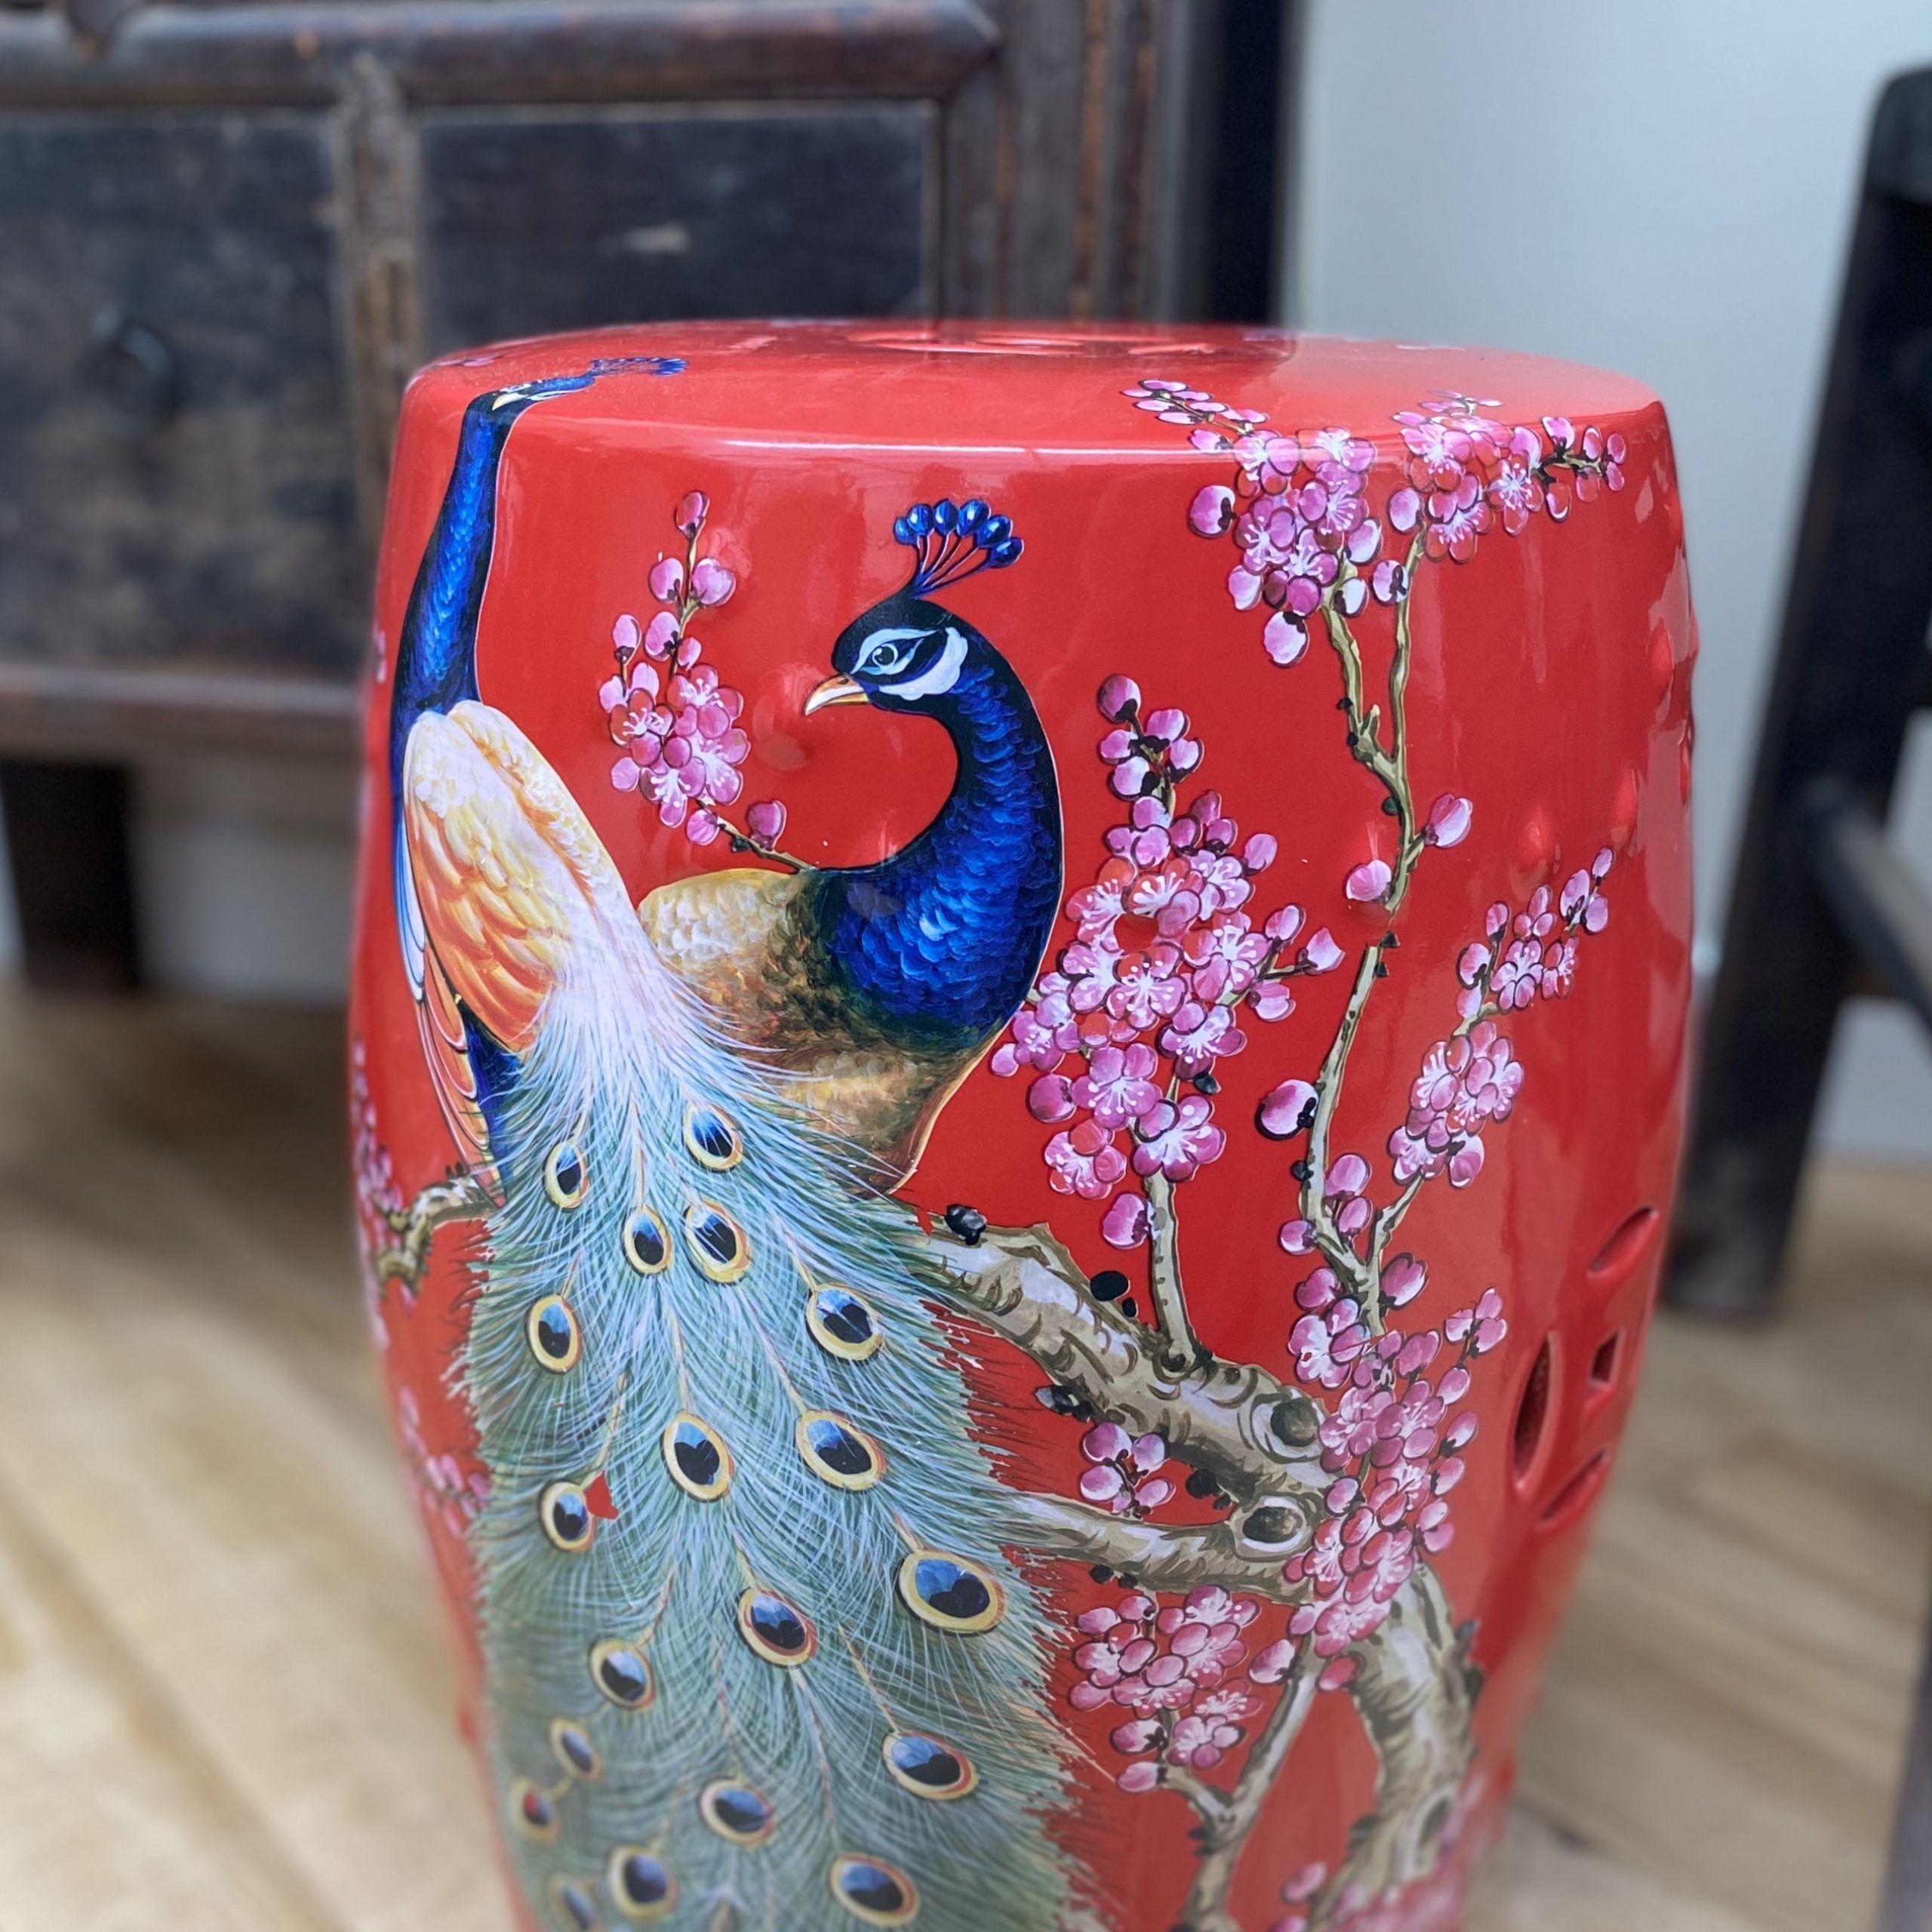 Red Ceramic Stool With Peacocks In 2020 | Ceramic Stool In Maci Tropical Birds Garden Stools (View 9 of 25)